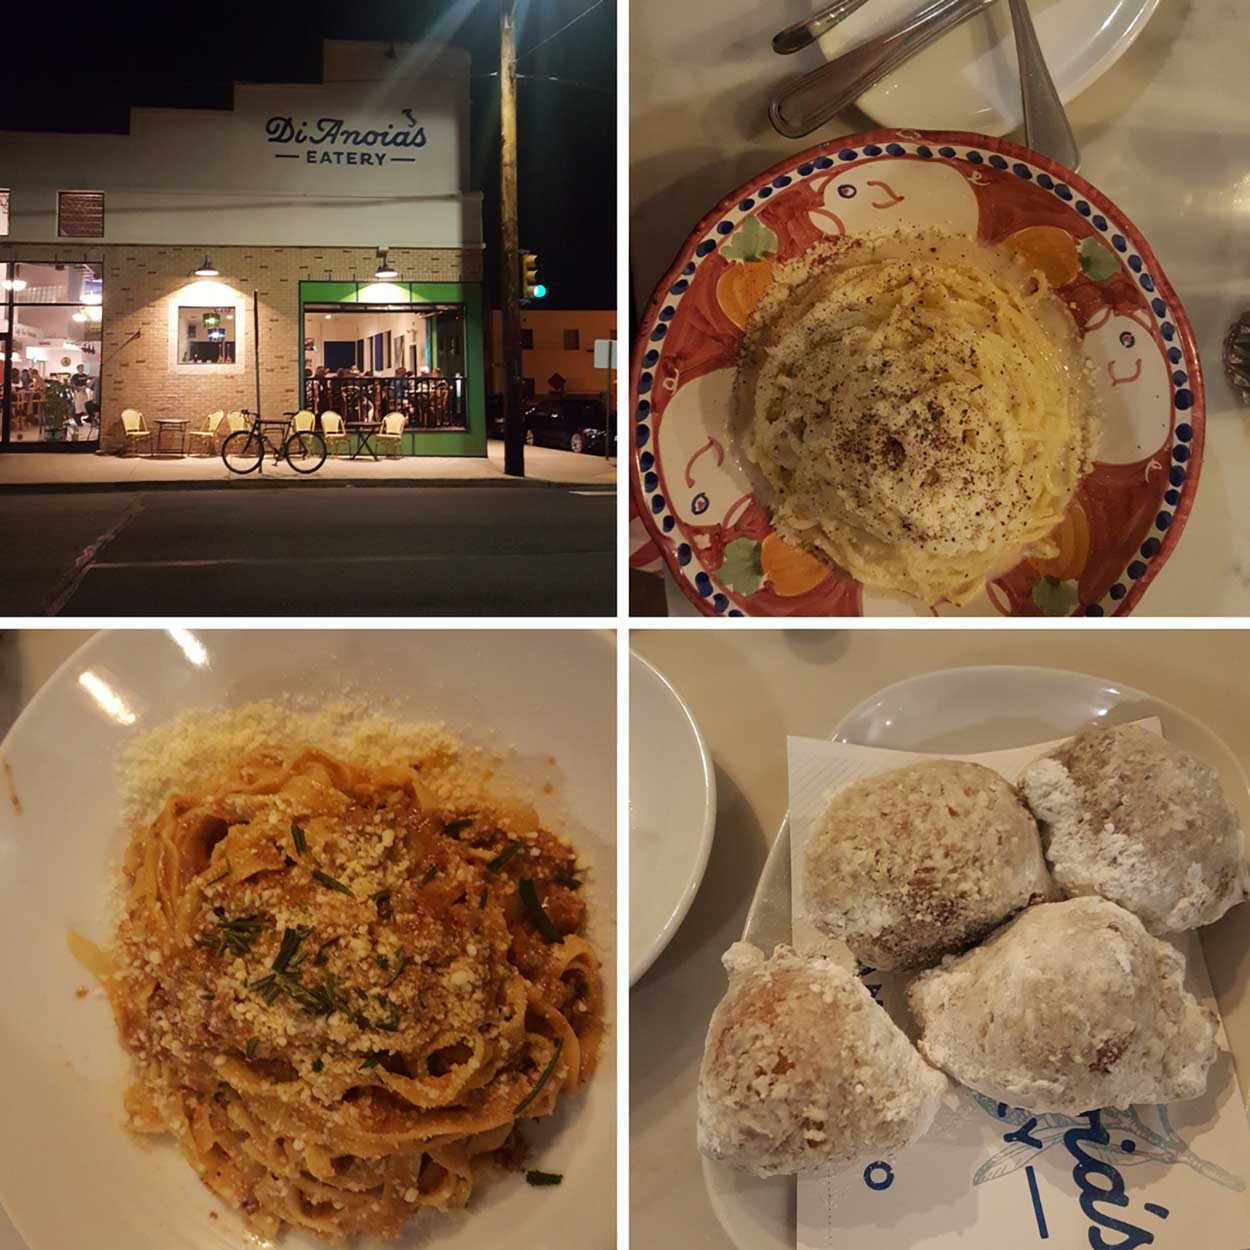 Collage of photos from DiAnoia's Eatery, including pasta, the building, and dessert